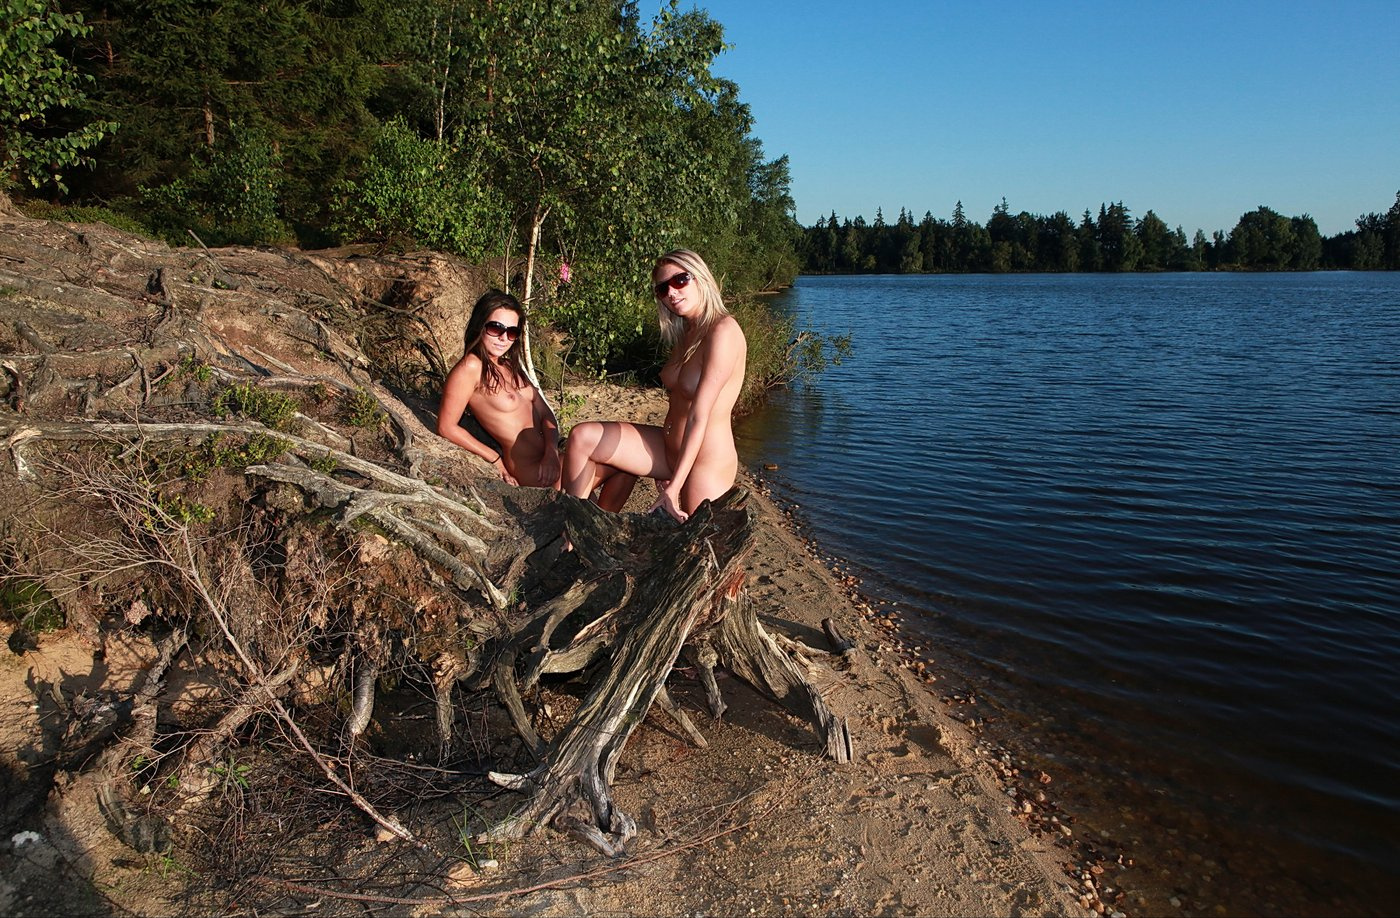 http://redbust.com/stuff/two-nudist-girls-by-the-lake/two-naturist-girls-nude-by-the-lake-32.jpg